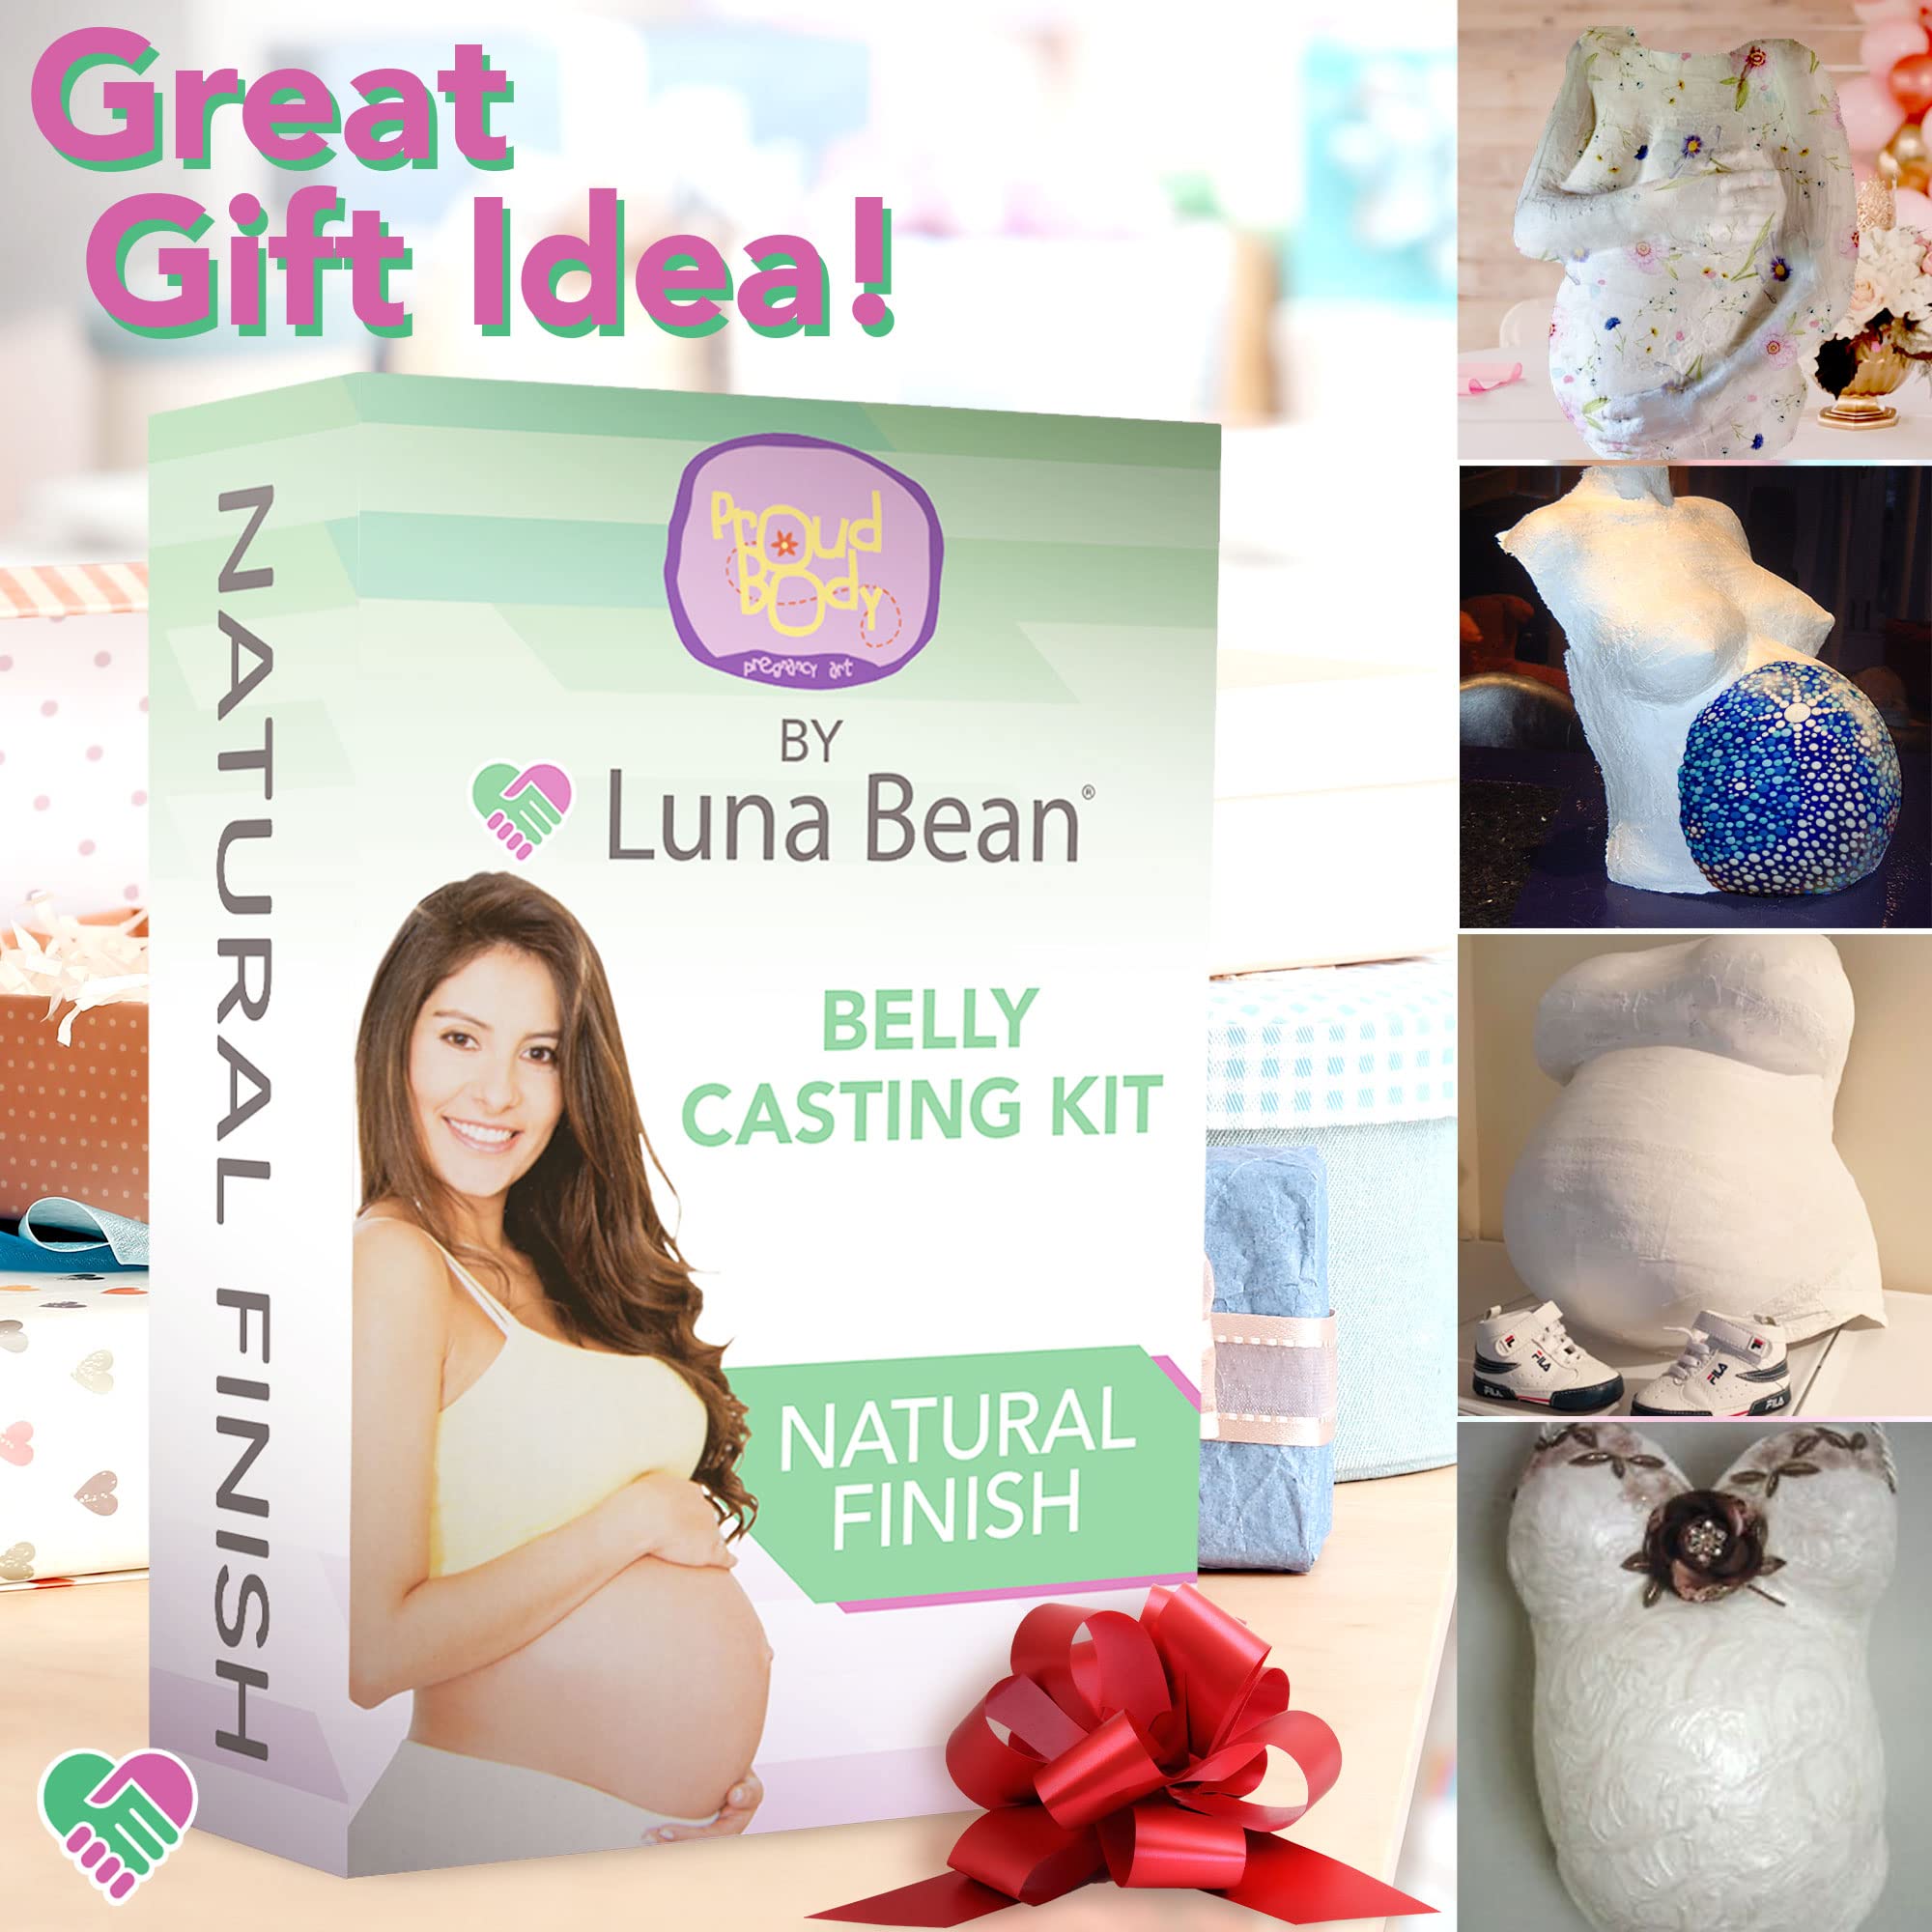 Belly Casting, Turn your pregnancy blessing into Art!